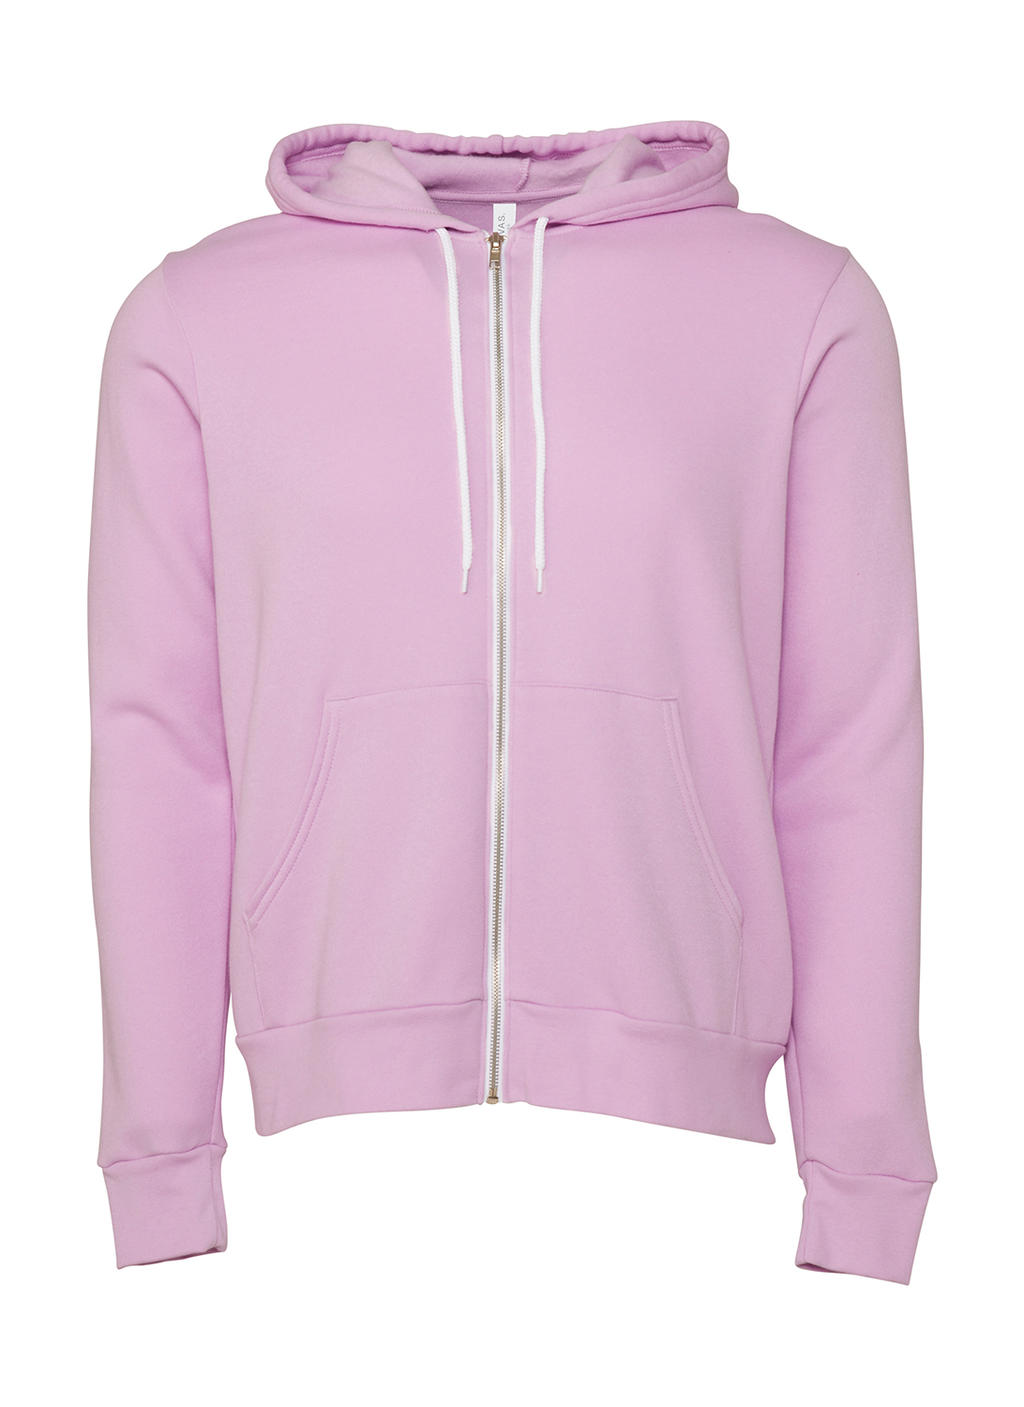  Unisex Poly-Cotton Full Zip Hoodie in Farbe Lilac